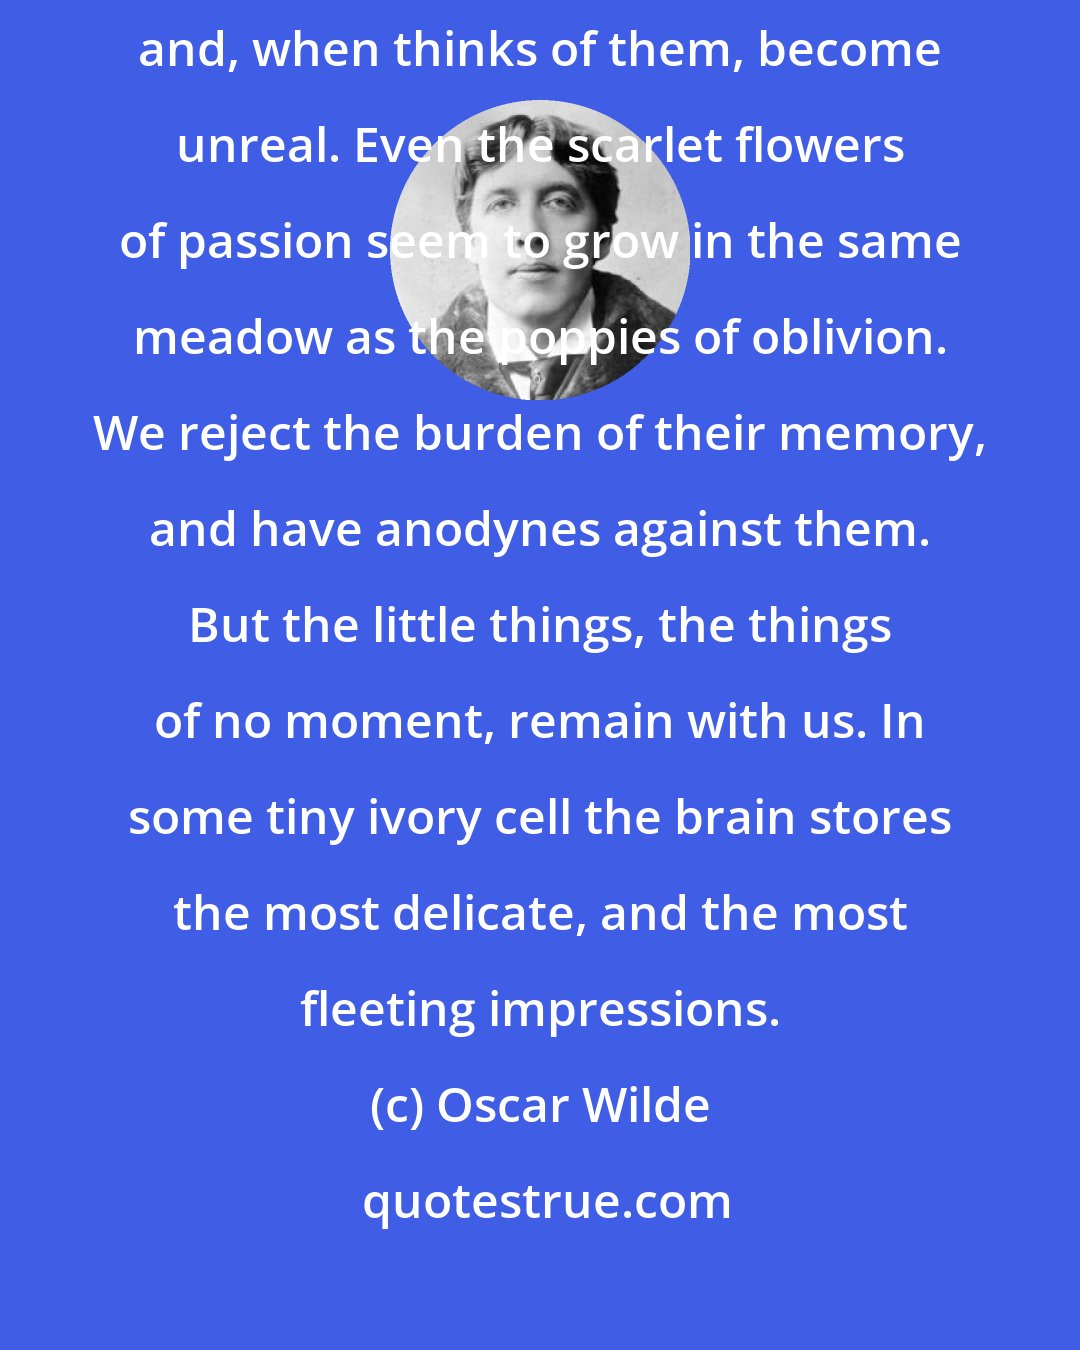 Oscar Wilde: The great events of life often leave one unmoved; they pass out of consciousness, and, when thinks of them, become unreal. Even the scarlet flowers of passion seem to grow in the same meadow as the poppies of oblivion. We reject the burden of their memory, and have anodynes against them. But the little things, the things of no moment, remain with us. In some tiny ivory cell the brain stores the most delicate, and the most fleeting impressions.